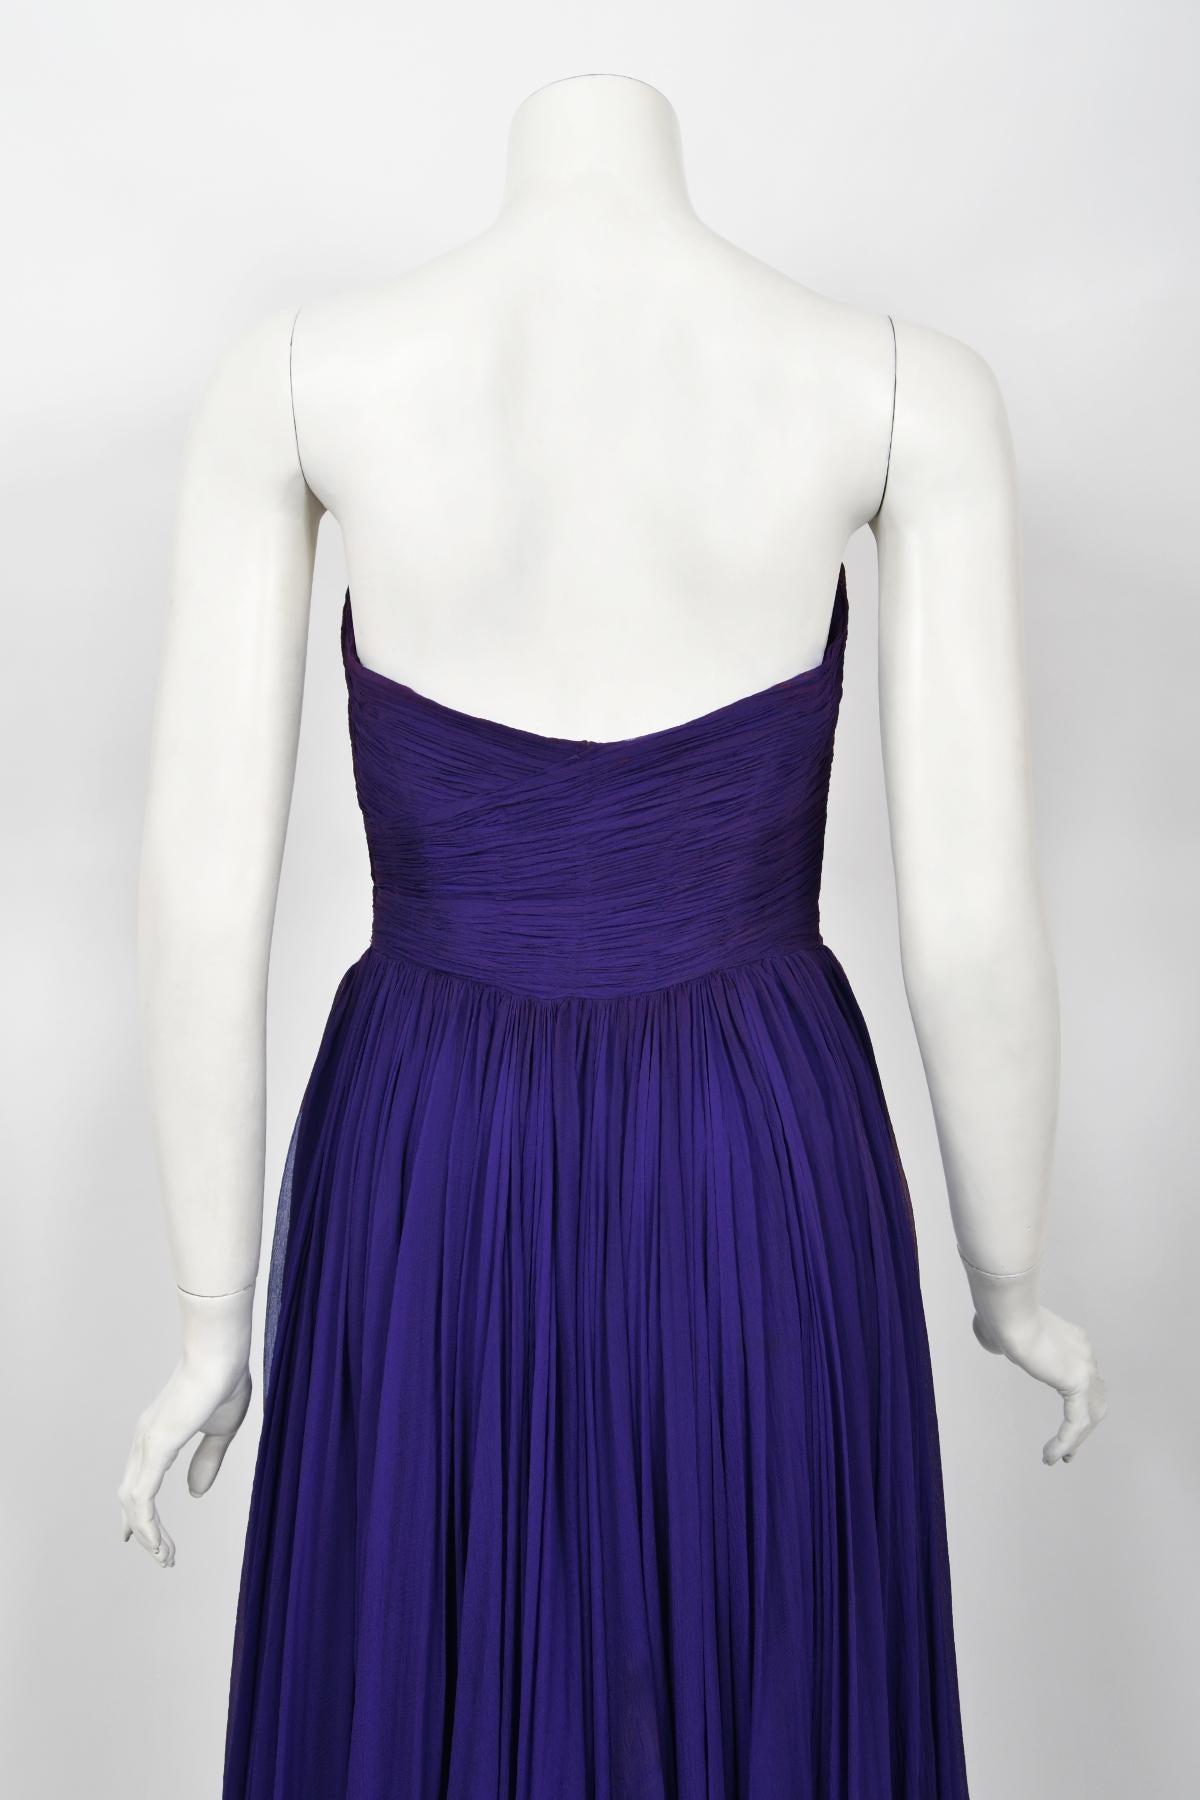 Vintage 1950s Curiel Couture Pleated Purple Silk Chiffon Strapless Goddess Gown  For Sale 12